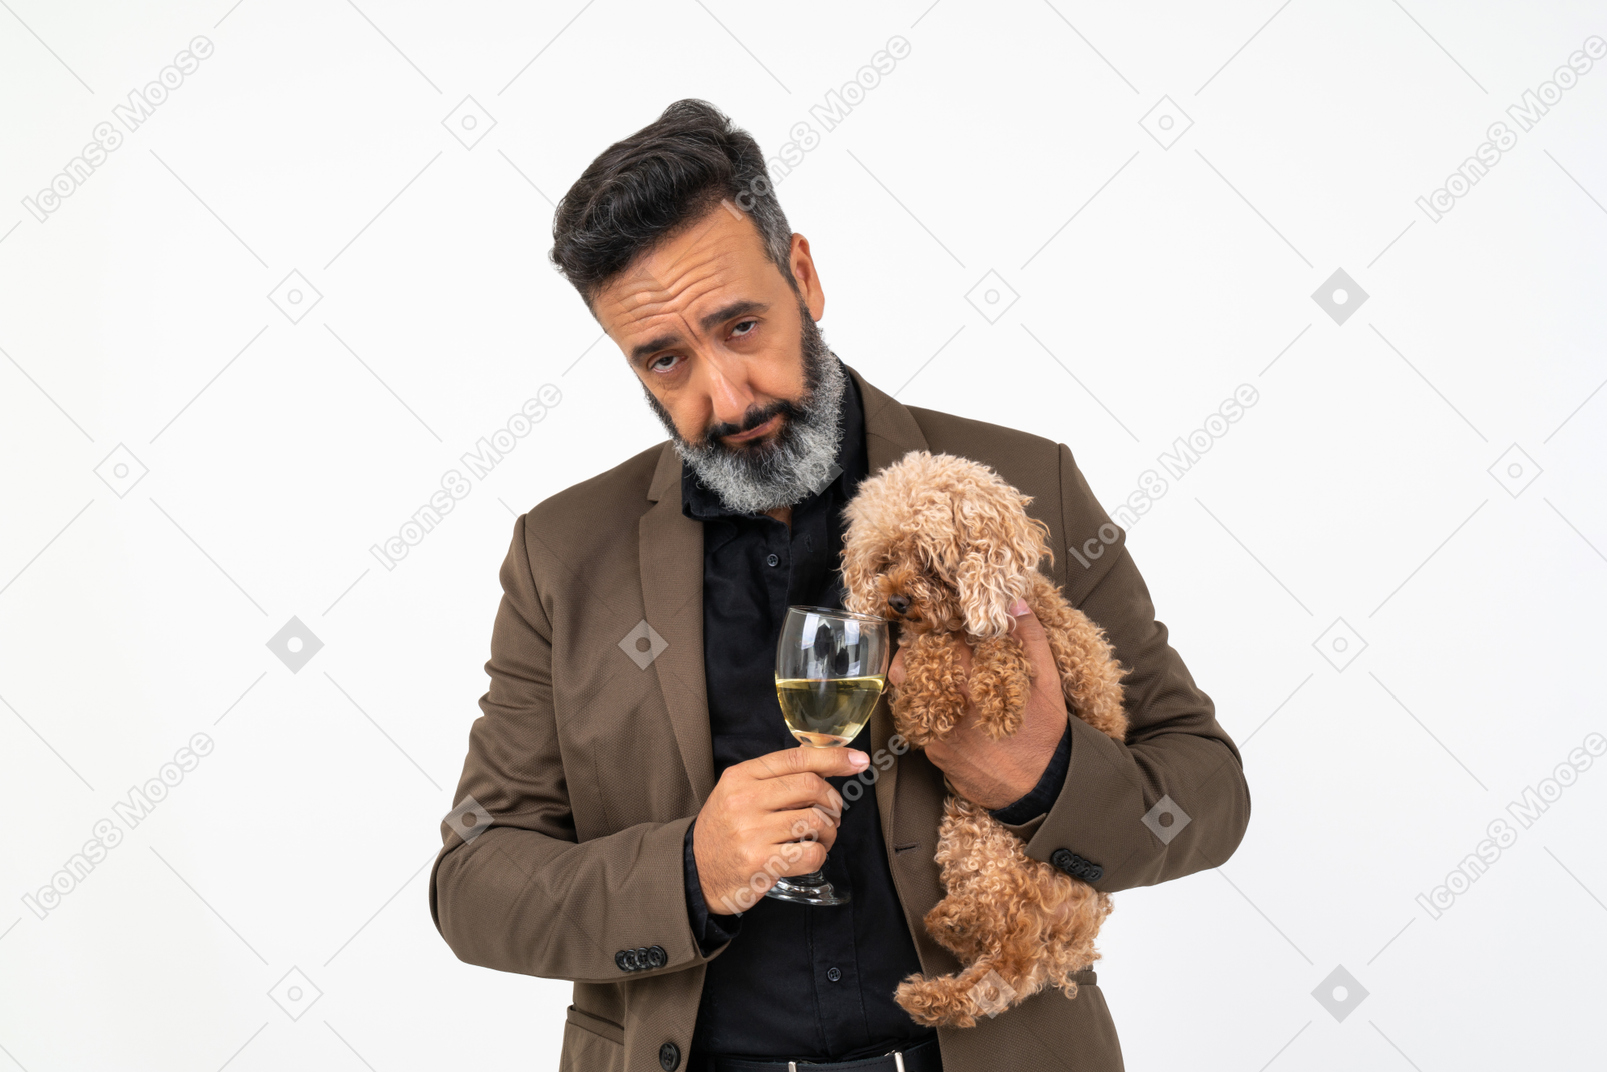 Mature man giving a sip of wine to a puppy that he's holding